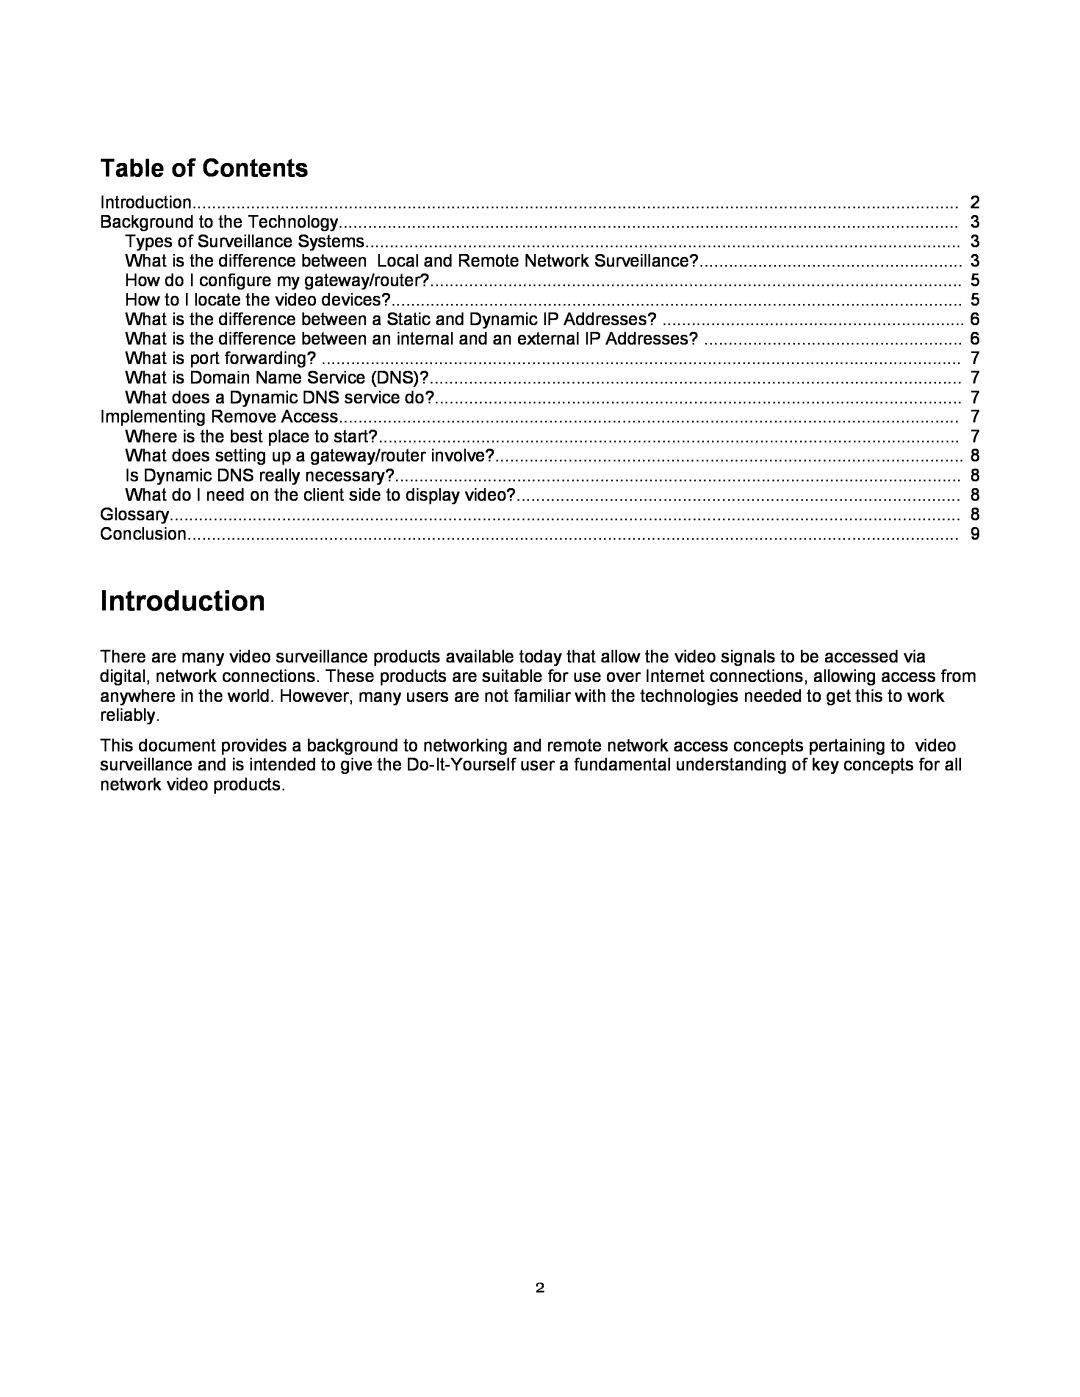 LOREX Technology Surveillance Systems manual Introduction, Table of Contents 